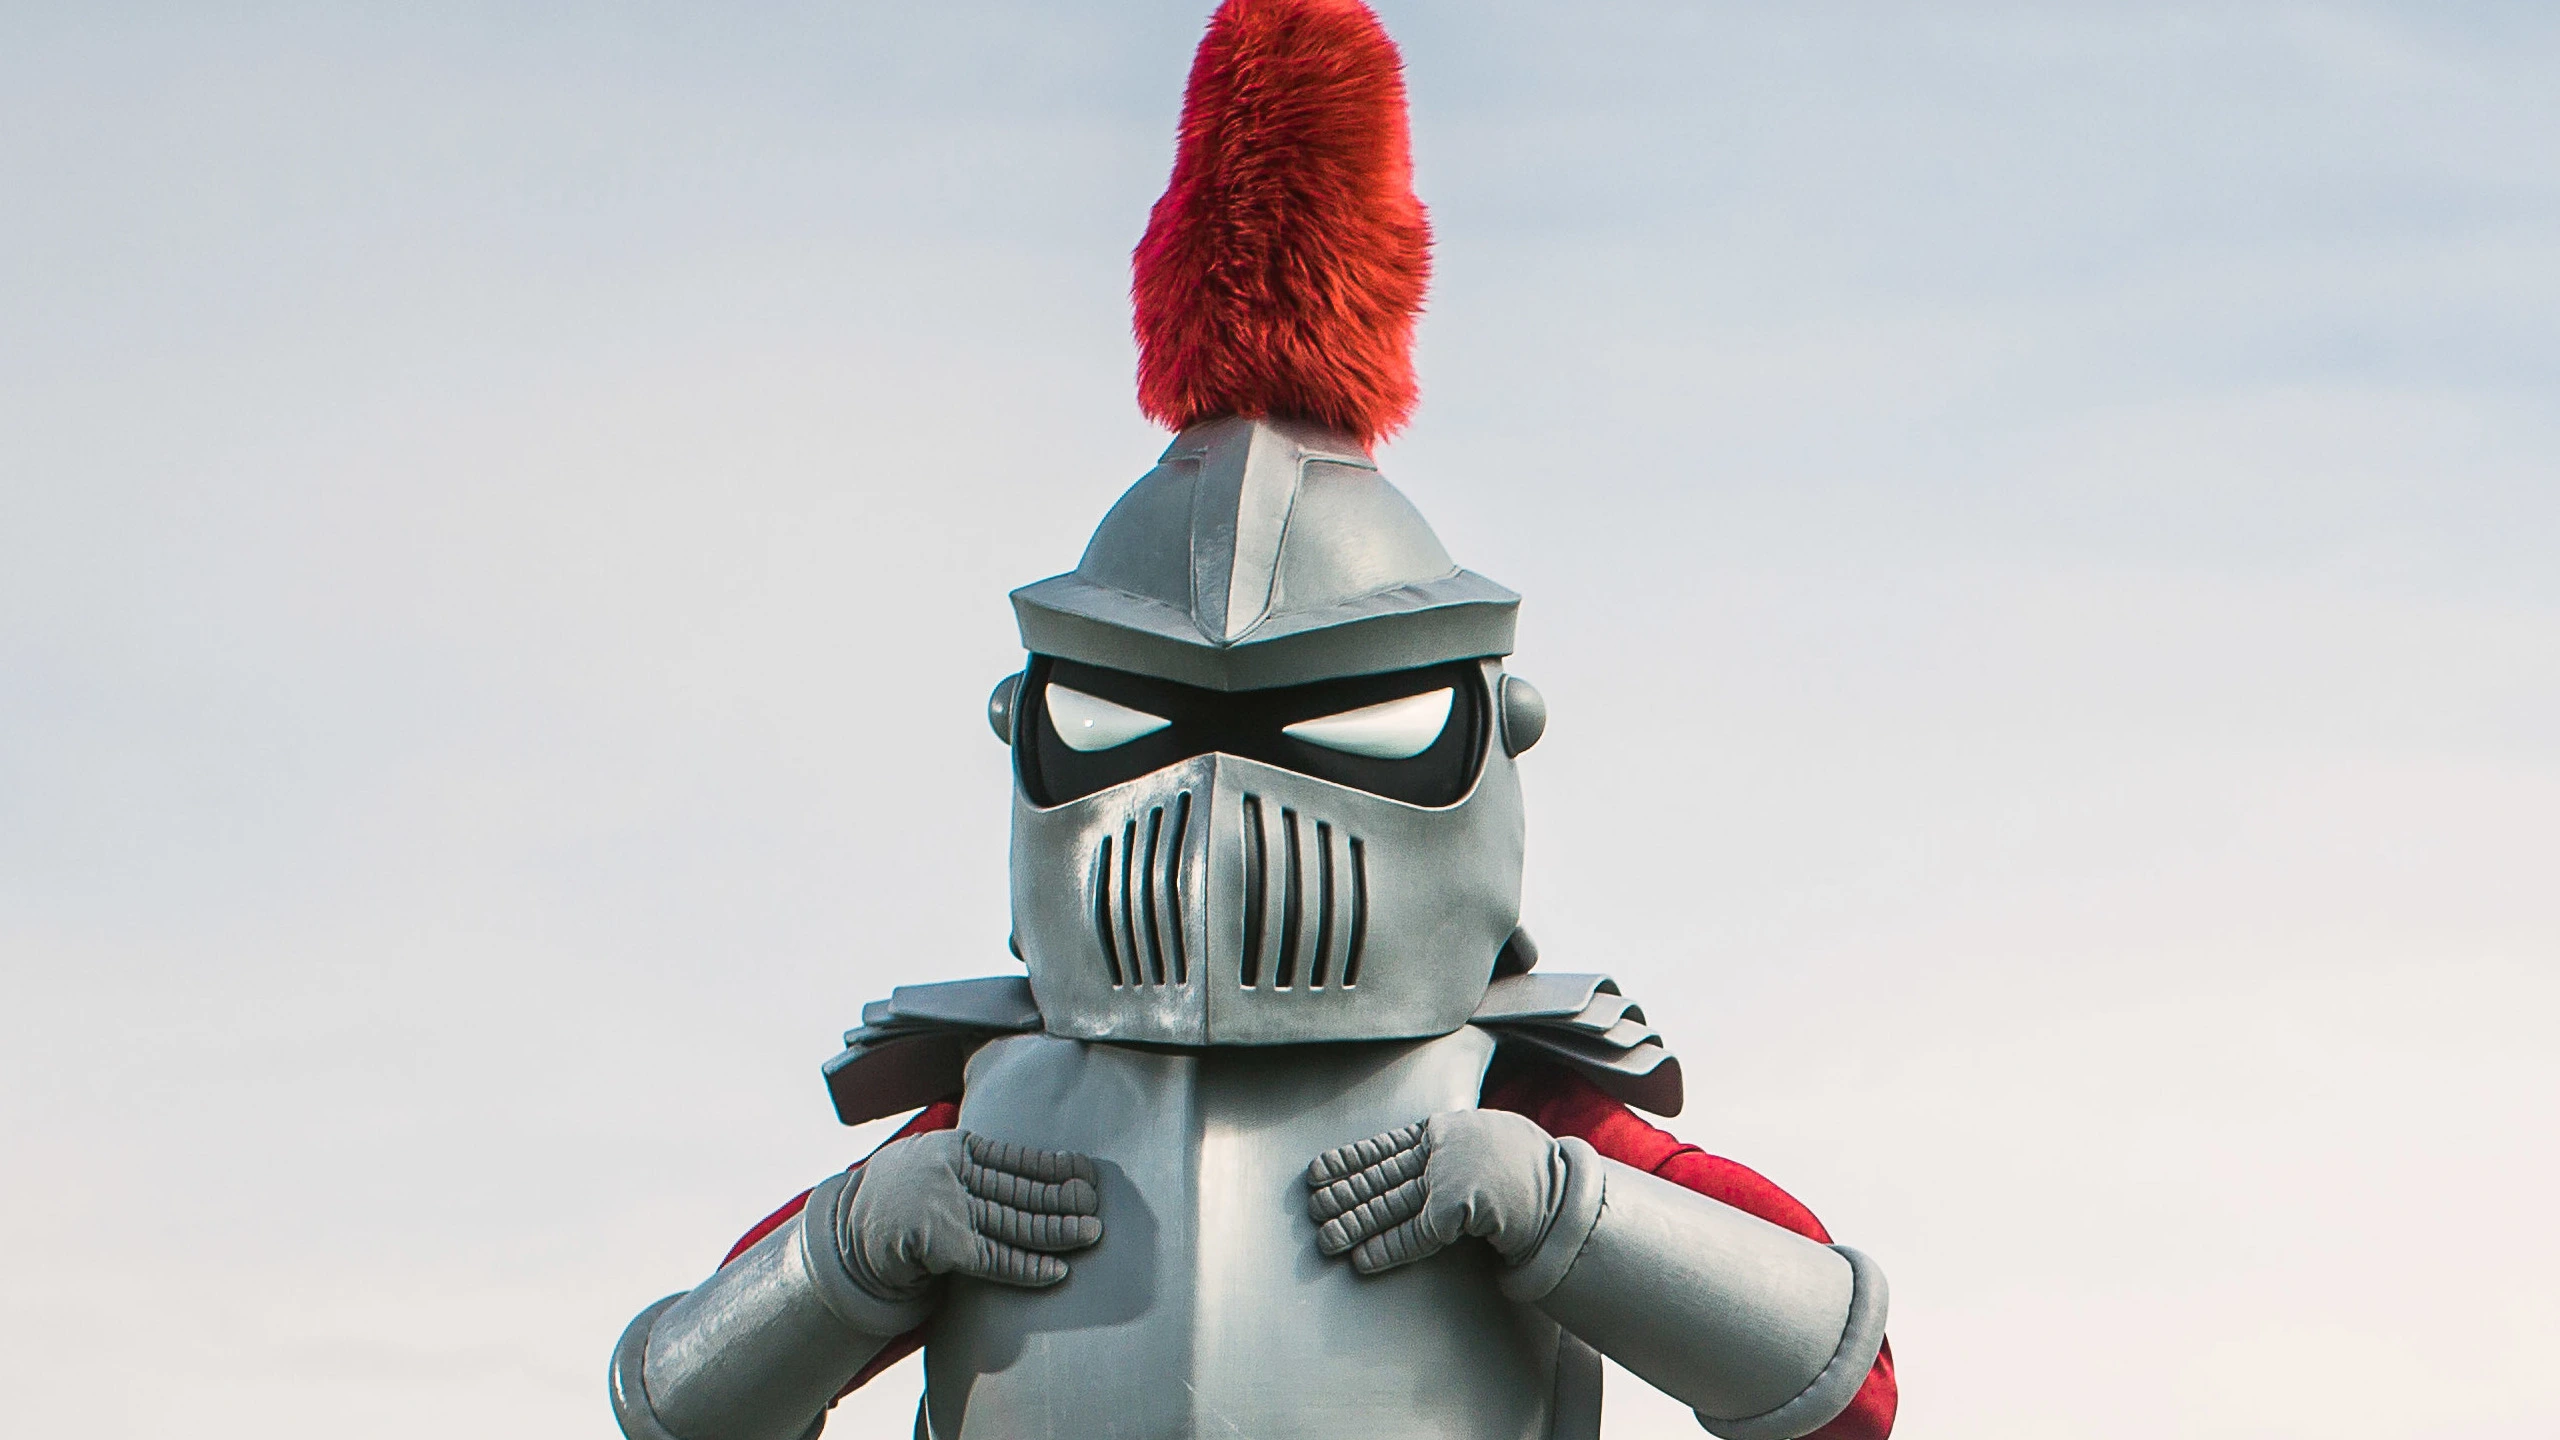 The Knight mascot stands with his hands at his chest